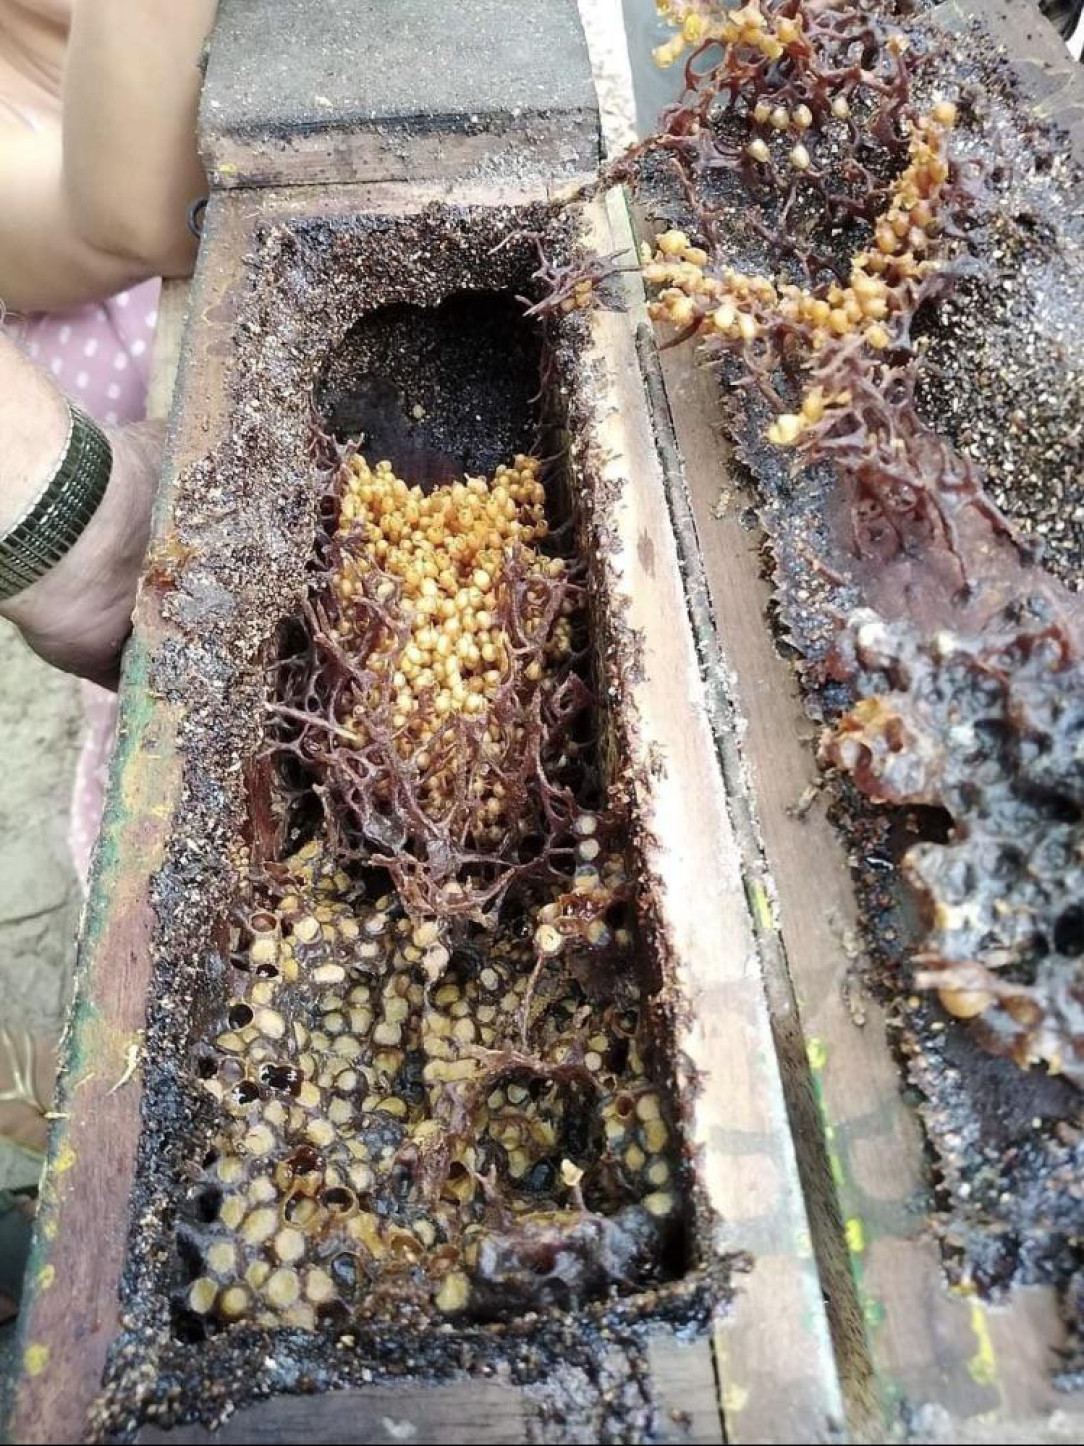 Vulture bees feed on rotting meat instead of nectar and their honey is called meat honey. This is their hive. Would you try some?